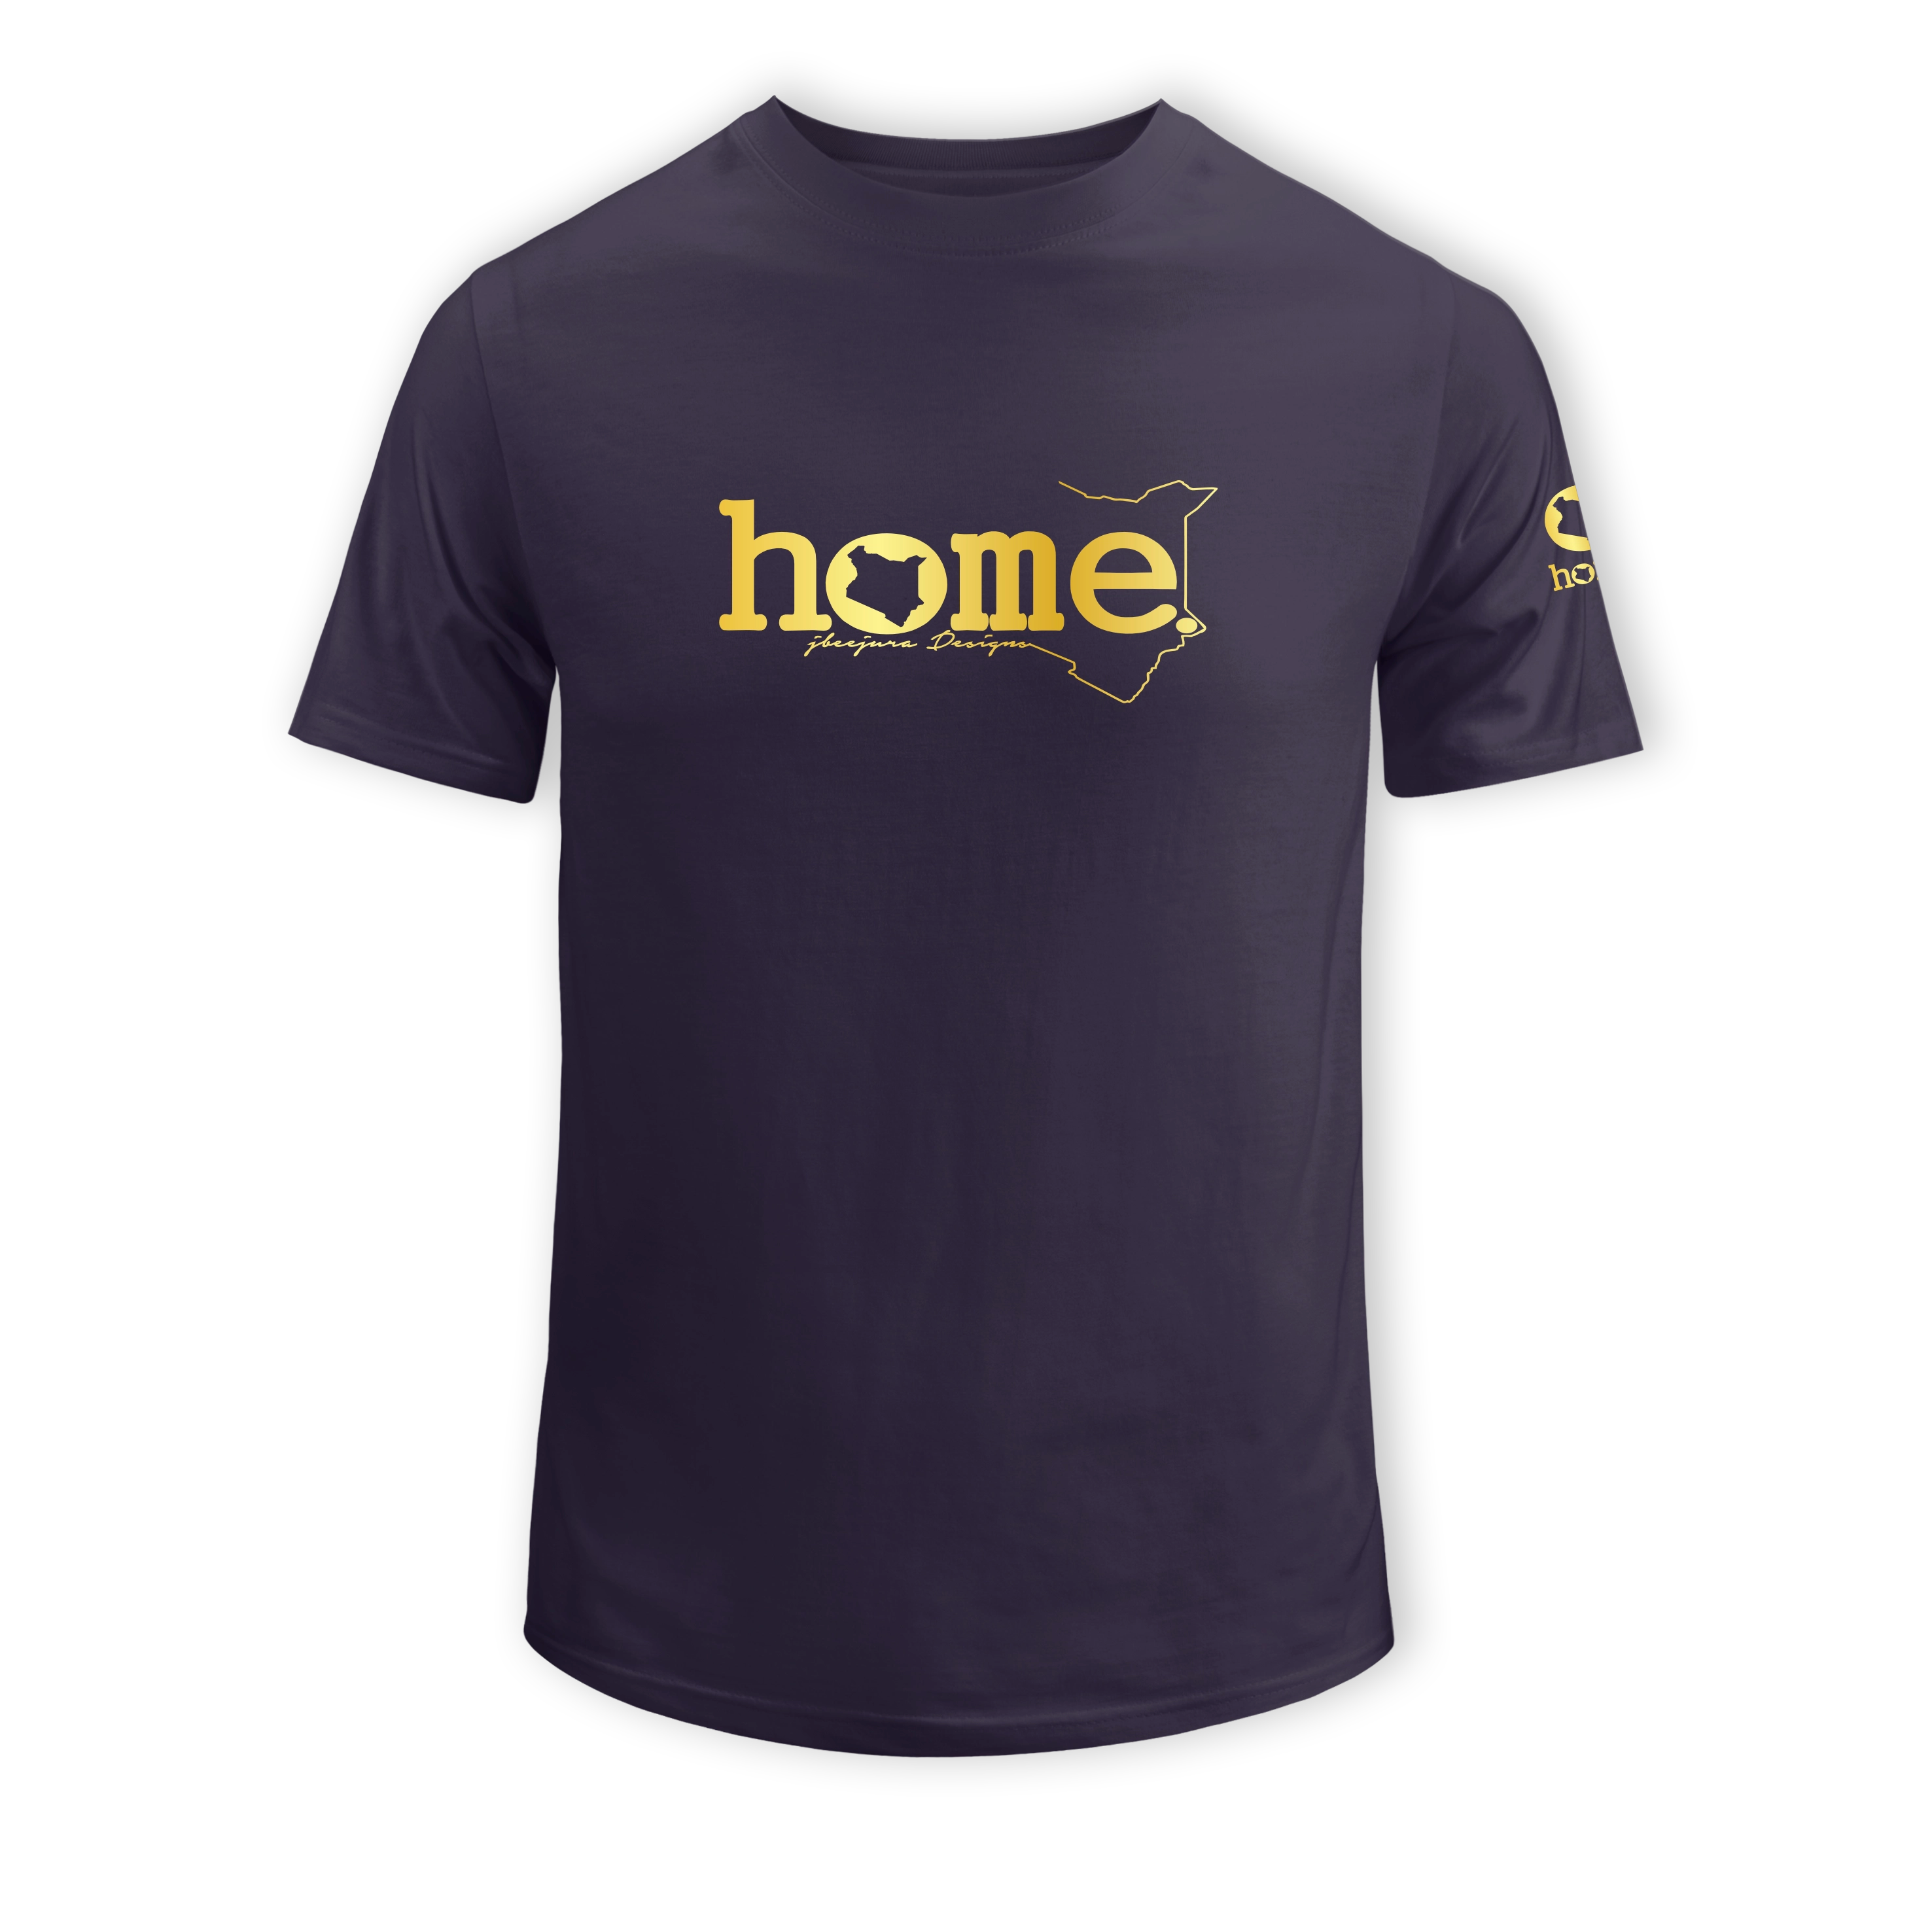 home_254 KIDS SHORT-SLEEVED RICH PURPLE T-SHIRT WITH A BLACK CLASSIC WORDS PRINT – COTTON PLUS FABRIC